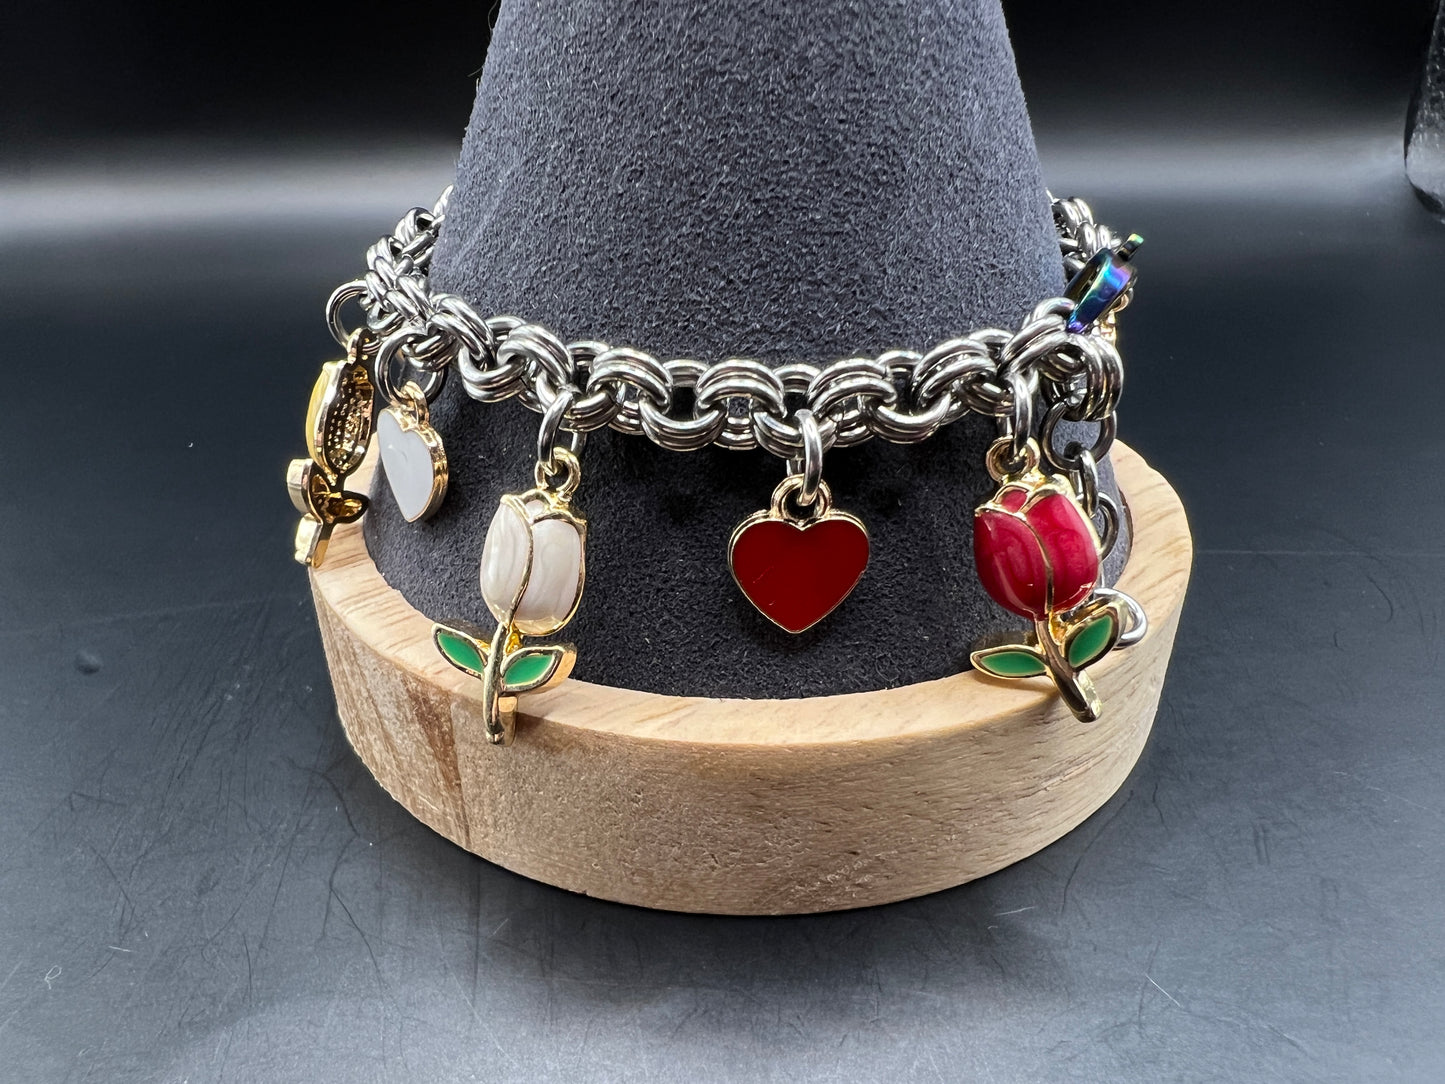 Charmed Spring: Charm Bracelet with Tulips & Hearts